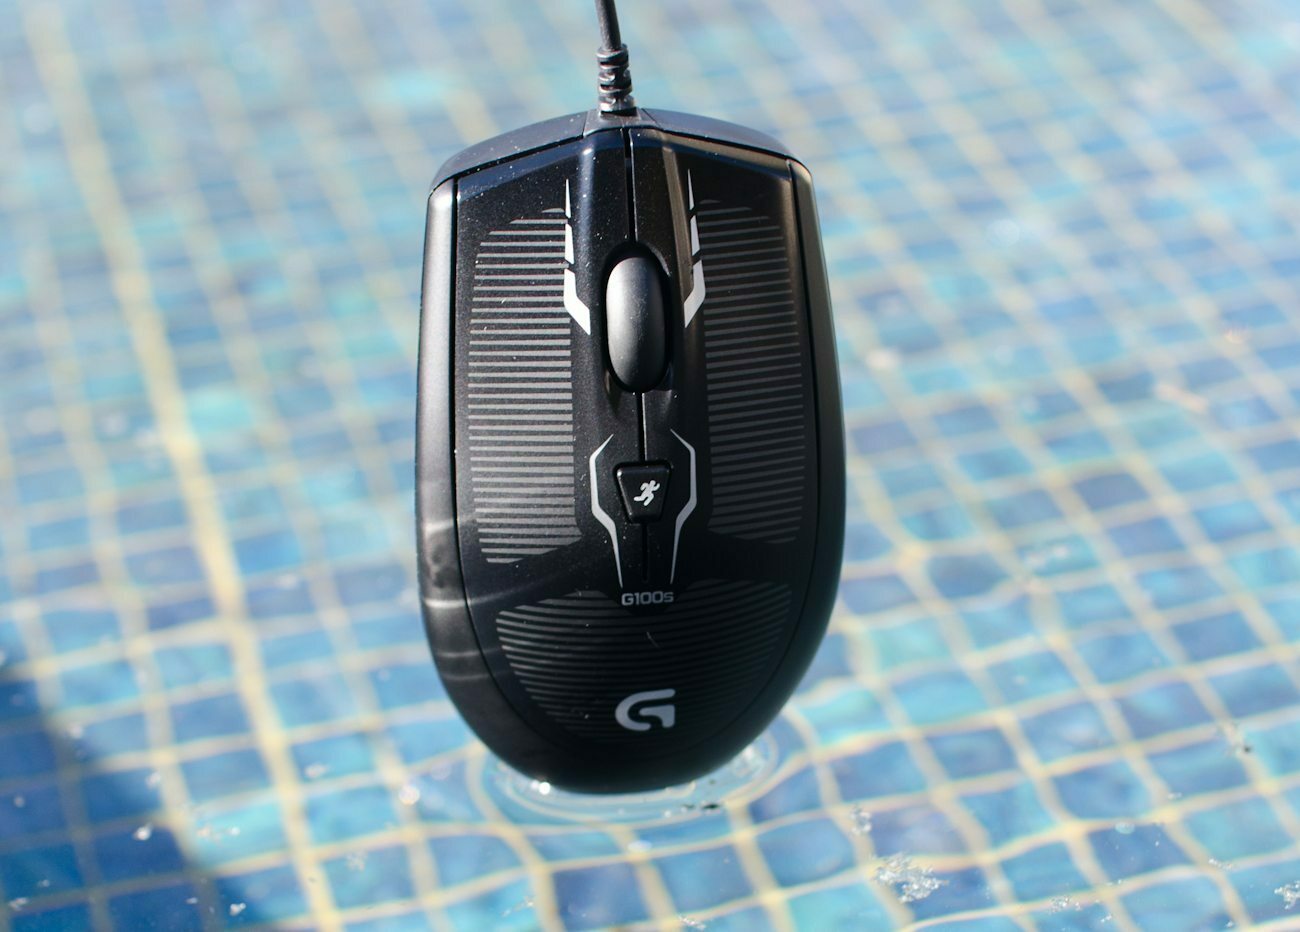 Logitech G100s Optical Gaming Mouse Review - Gadget Review